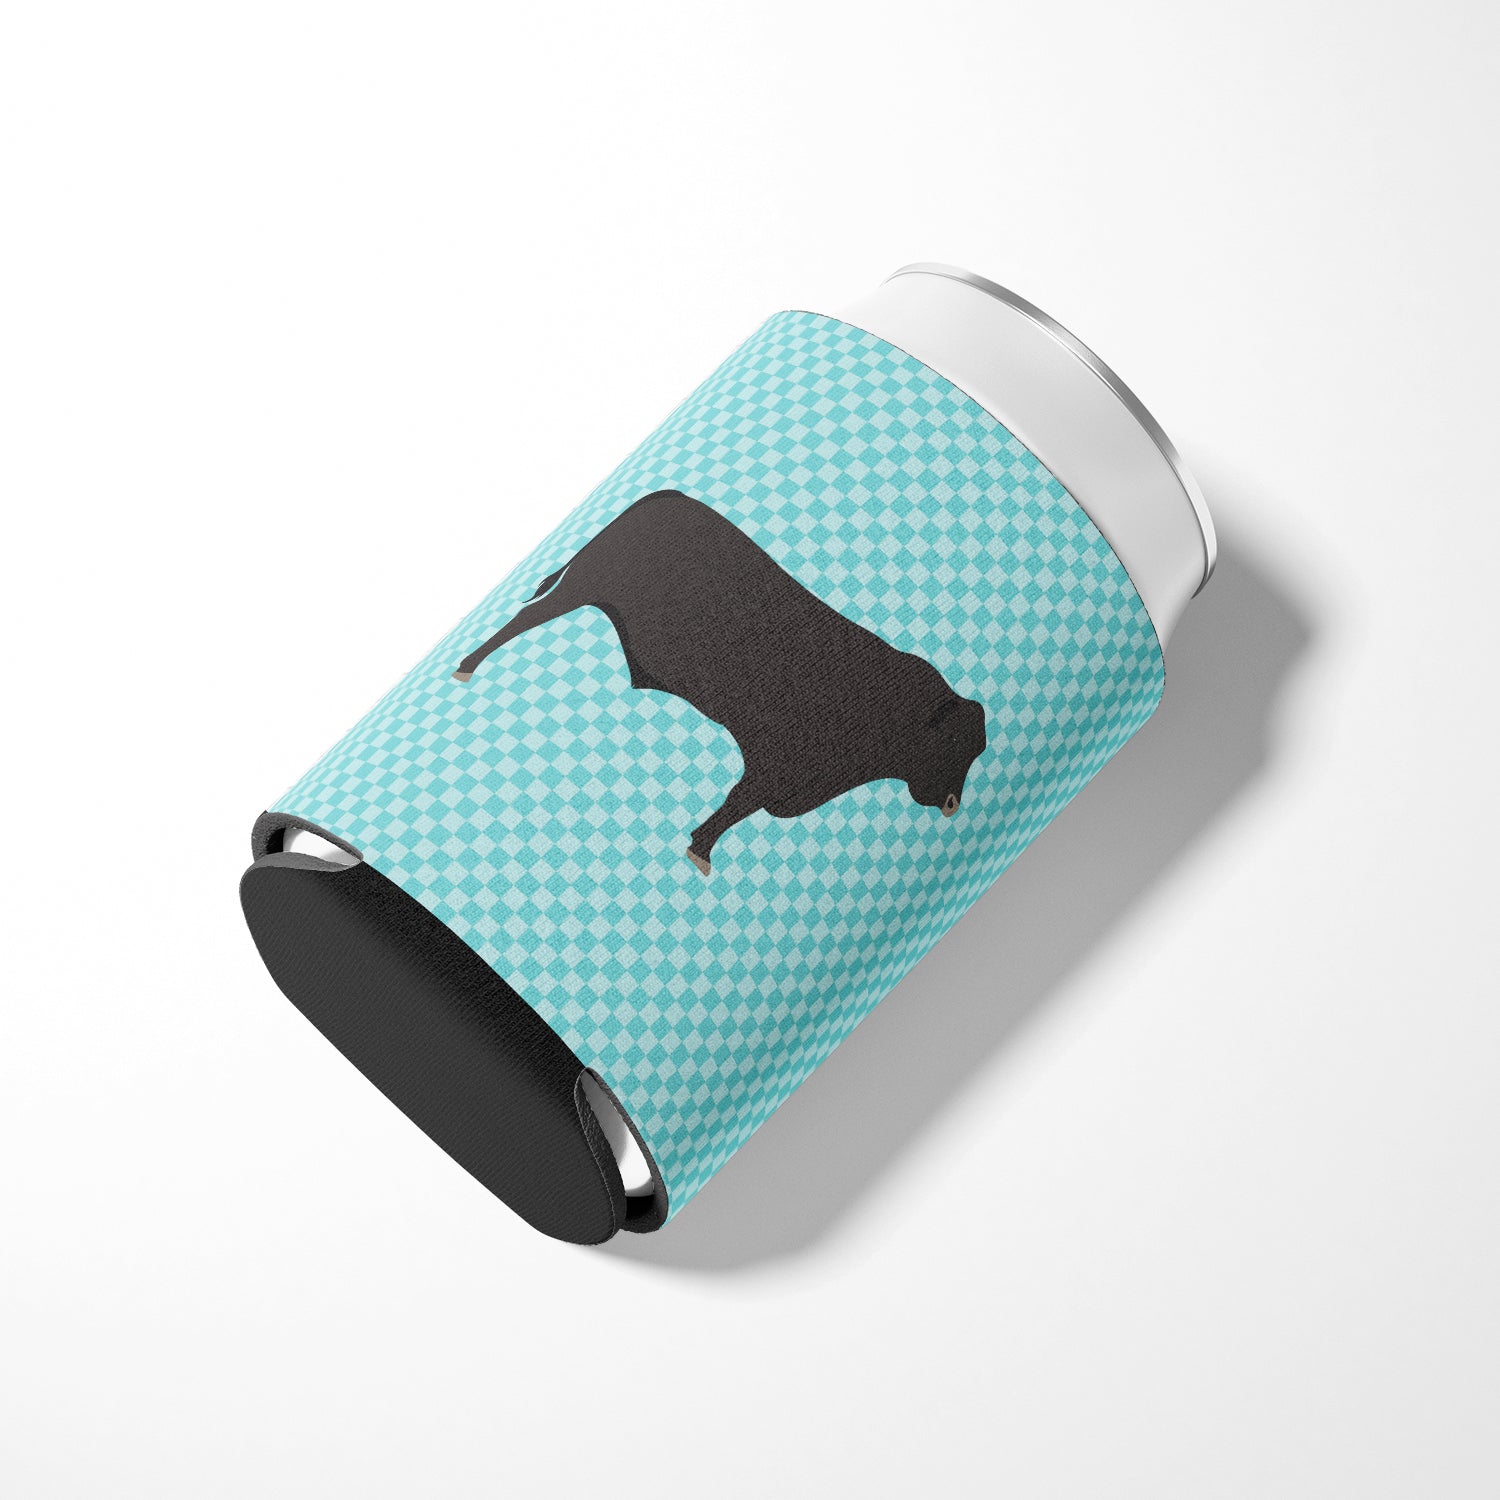 Black Angus Cow Blue Check Can or Bottle Hugger BB8002CC